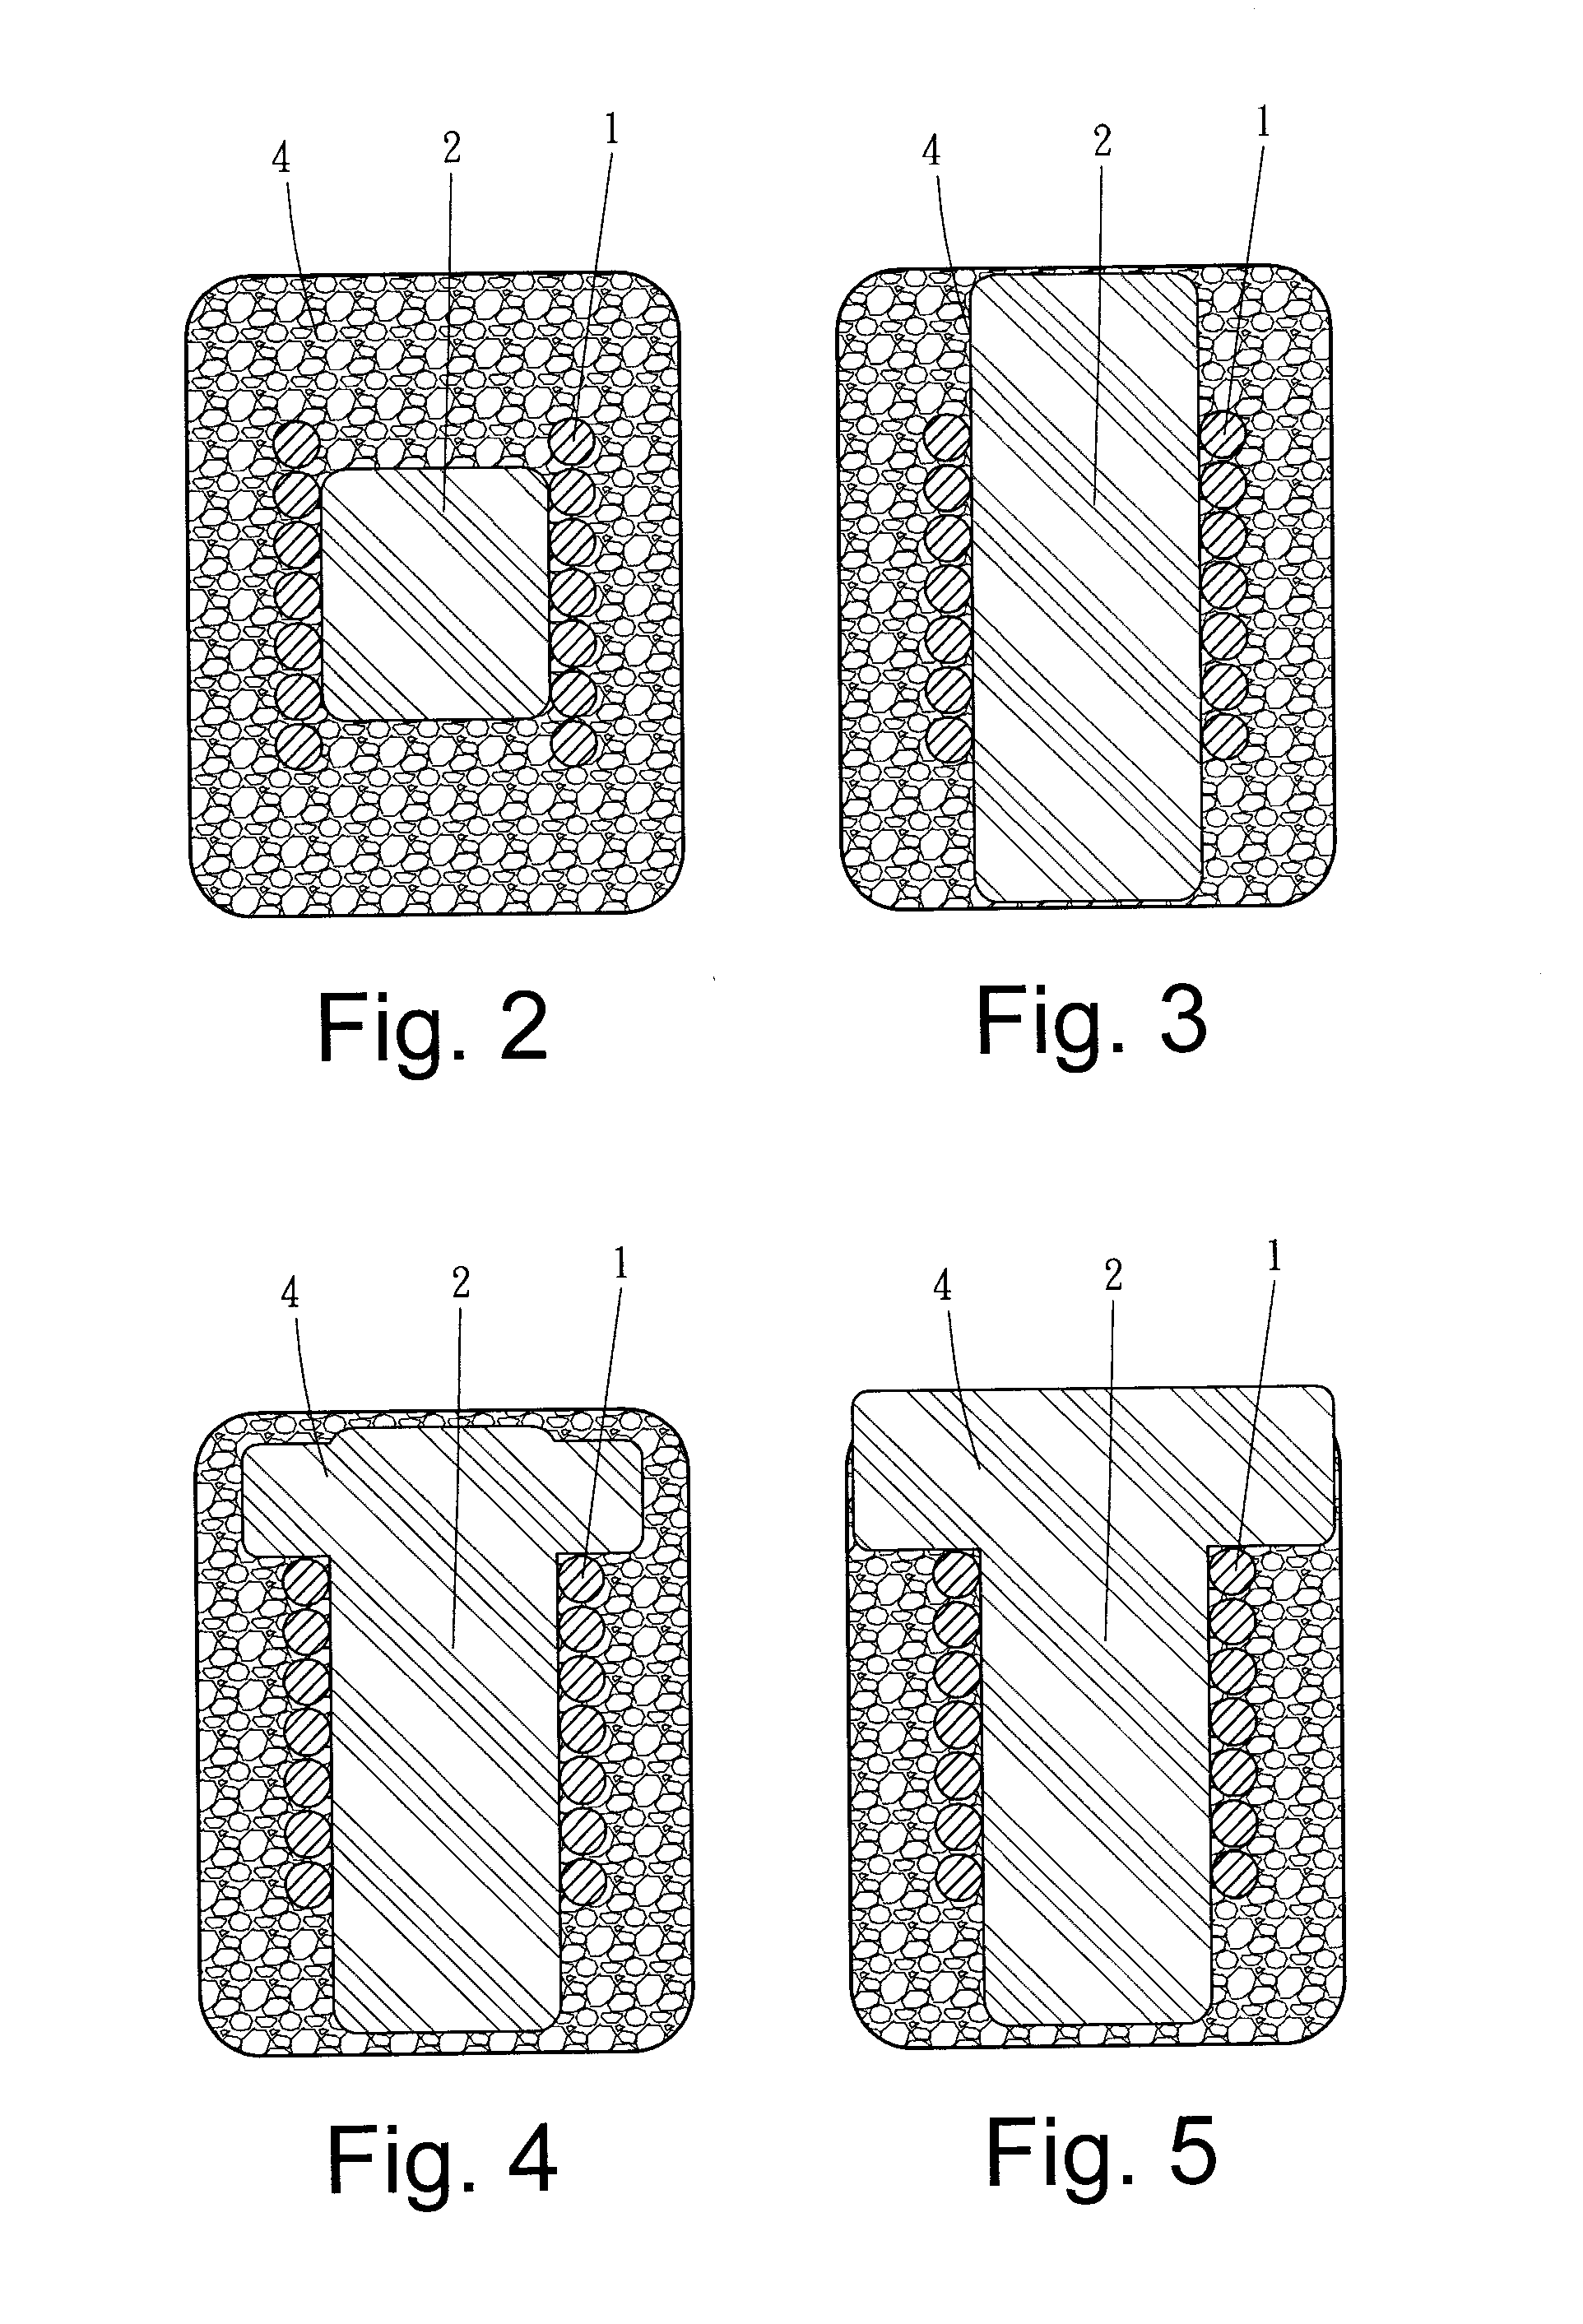 Hot-forming fabrication method and product of magnetic component